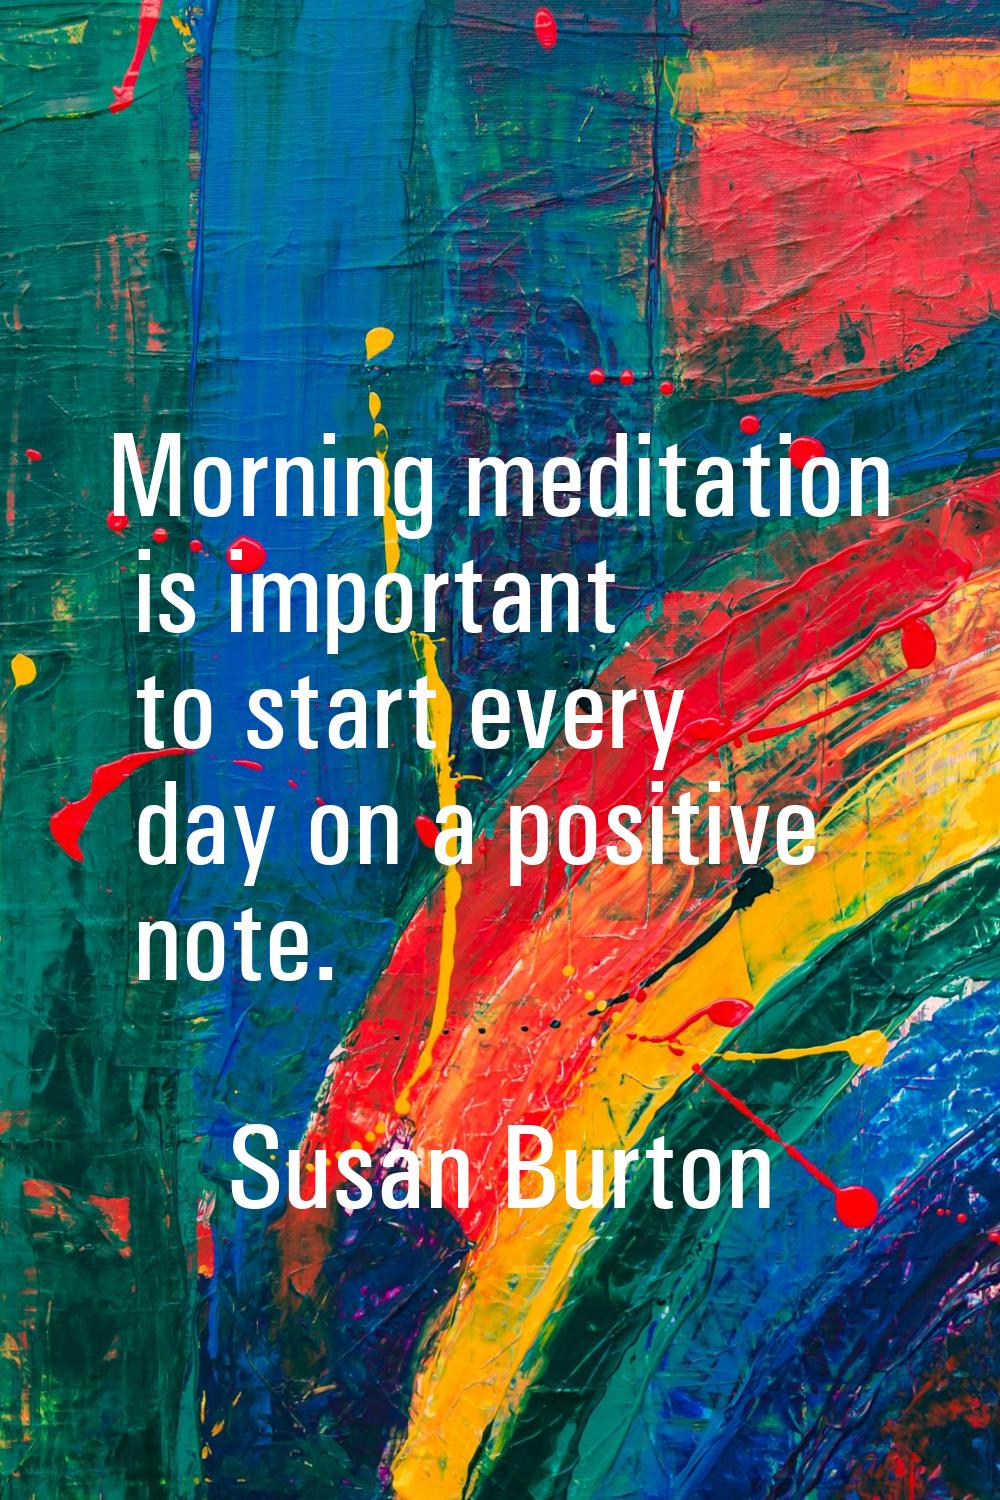 Morning meditation is important to start every day on a positive note.